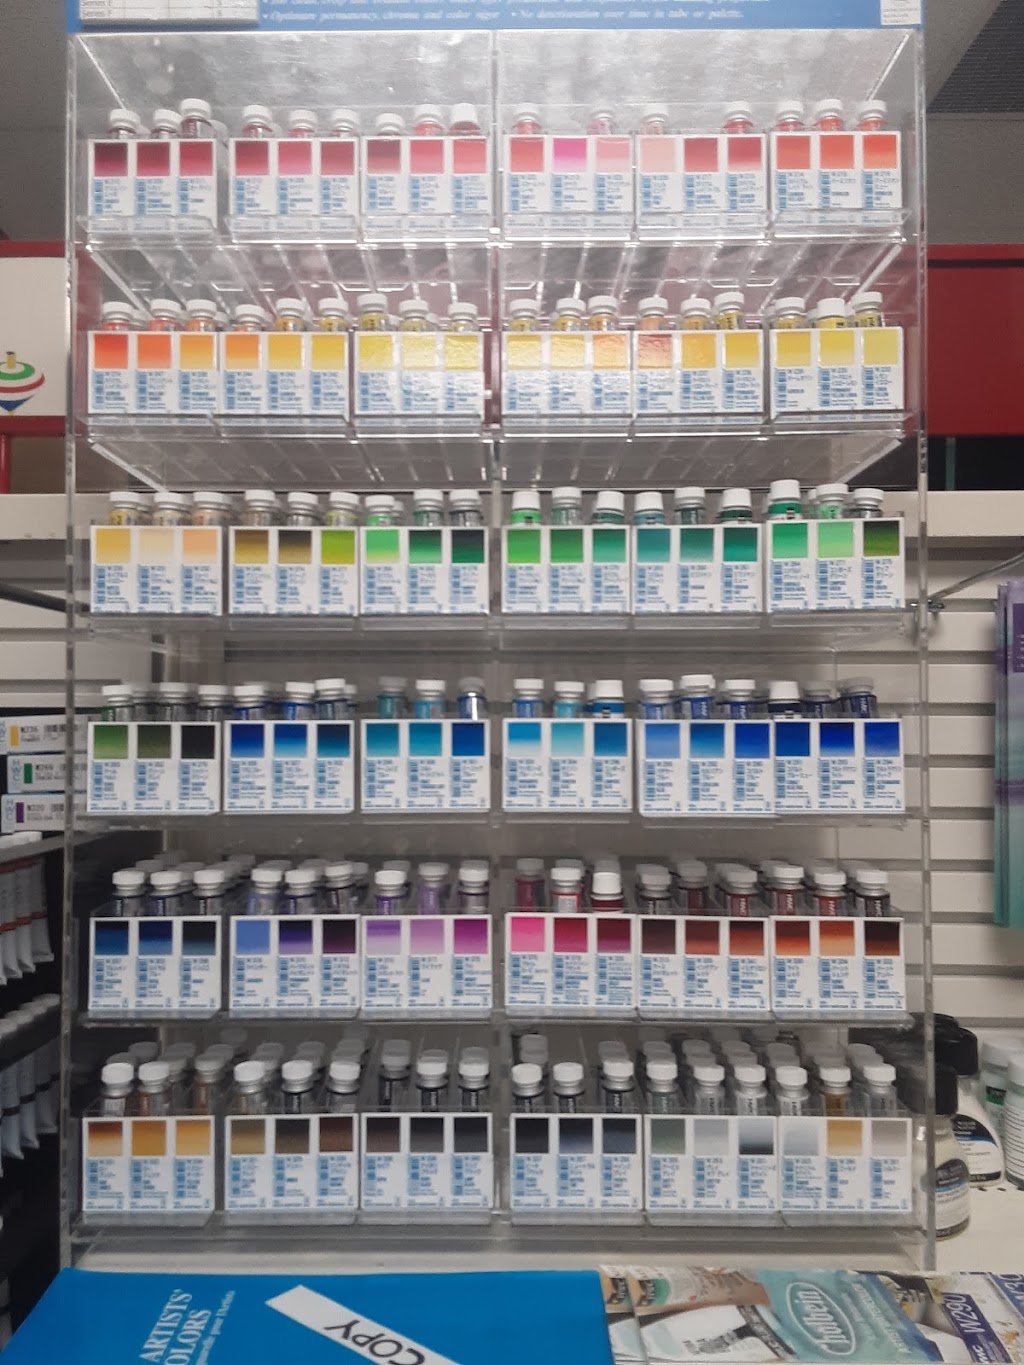 Colorest Art Supplies | 160 Newman Springs Rd E, Red Bank, NJ 07701 | Phone: (732) 741-0001